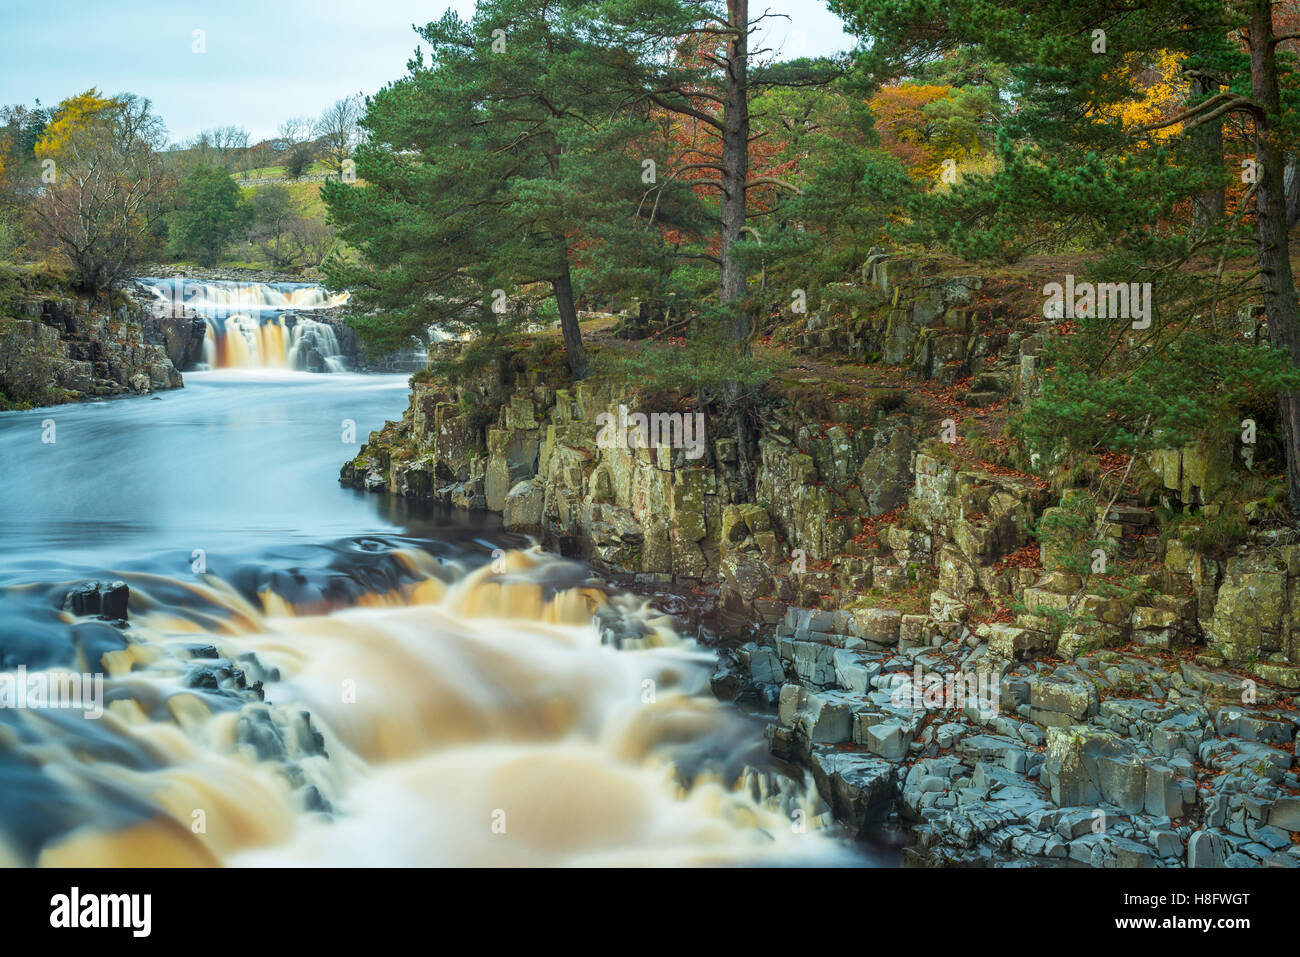 Low Force waterfall in Upper Teesdale, Stock Photo